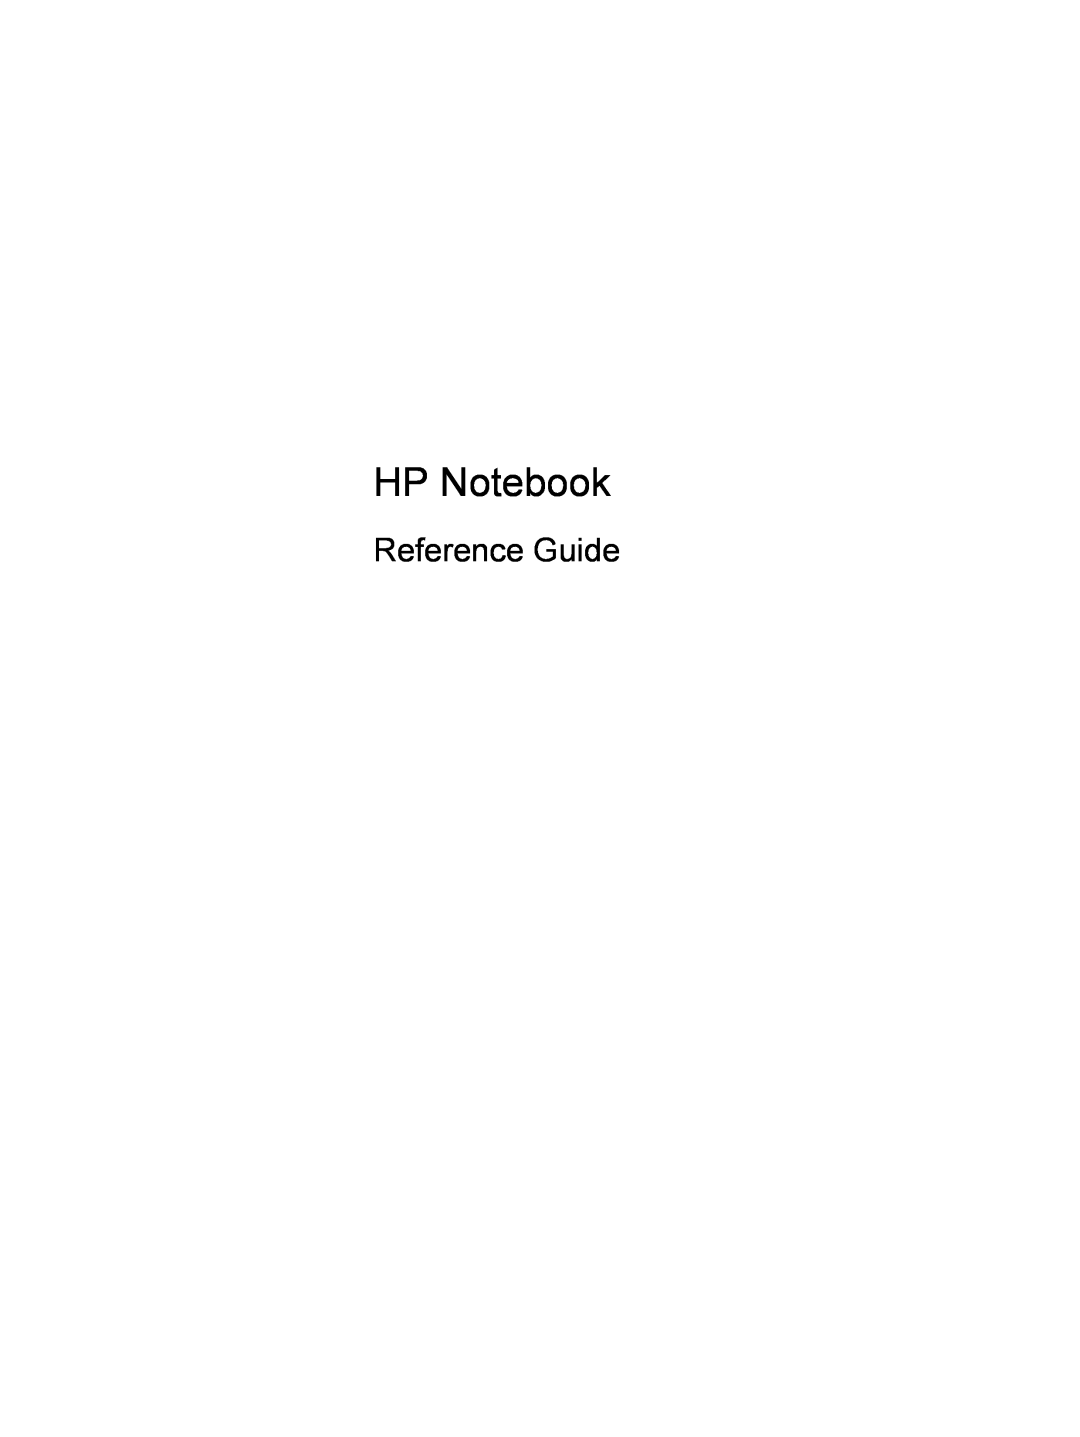 HP CQ57-489CA, CQ57-439WM, CQ57-489WM, CQ57-339WM, CQ57-315NR, CQ57-319WM, CQ57-310US manual HP Notebook, Reference Guide 